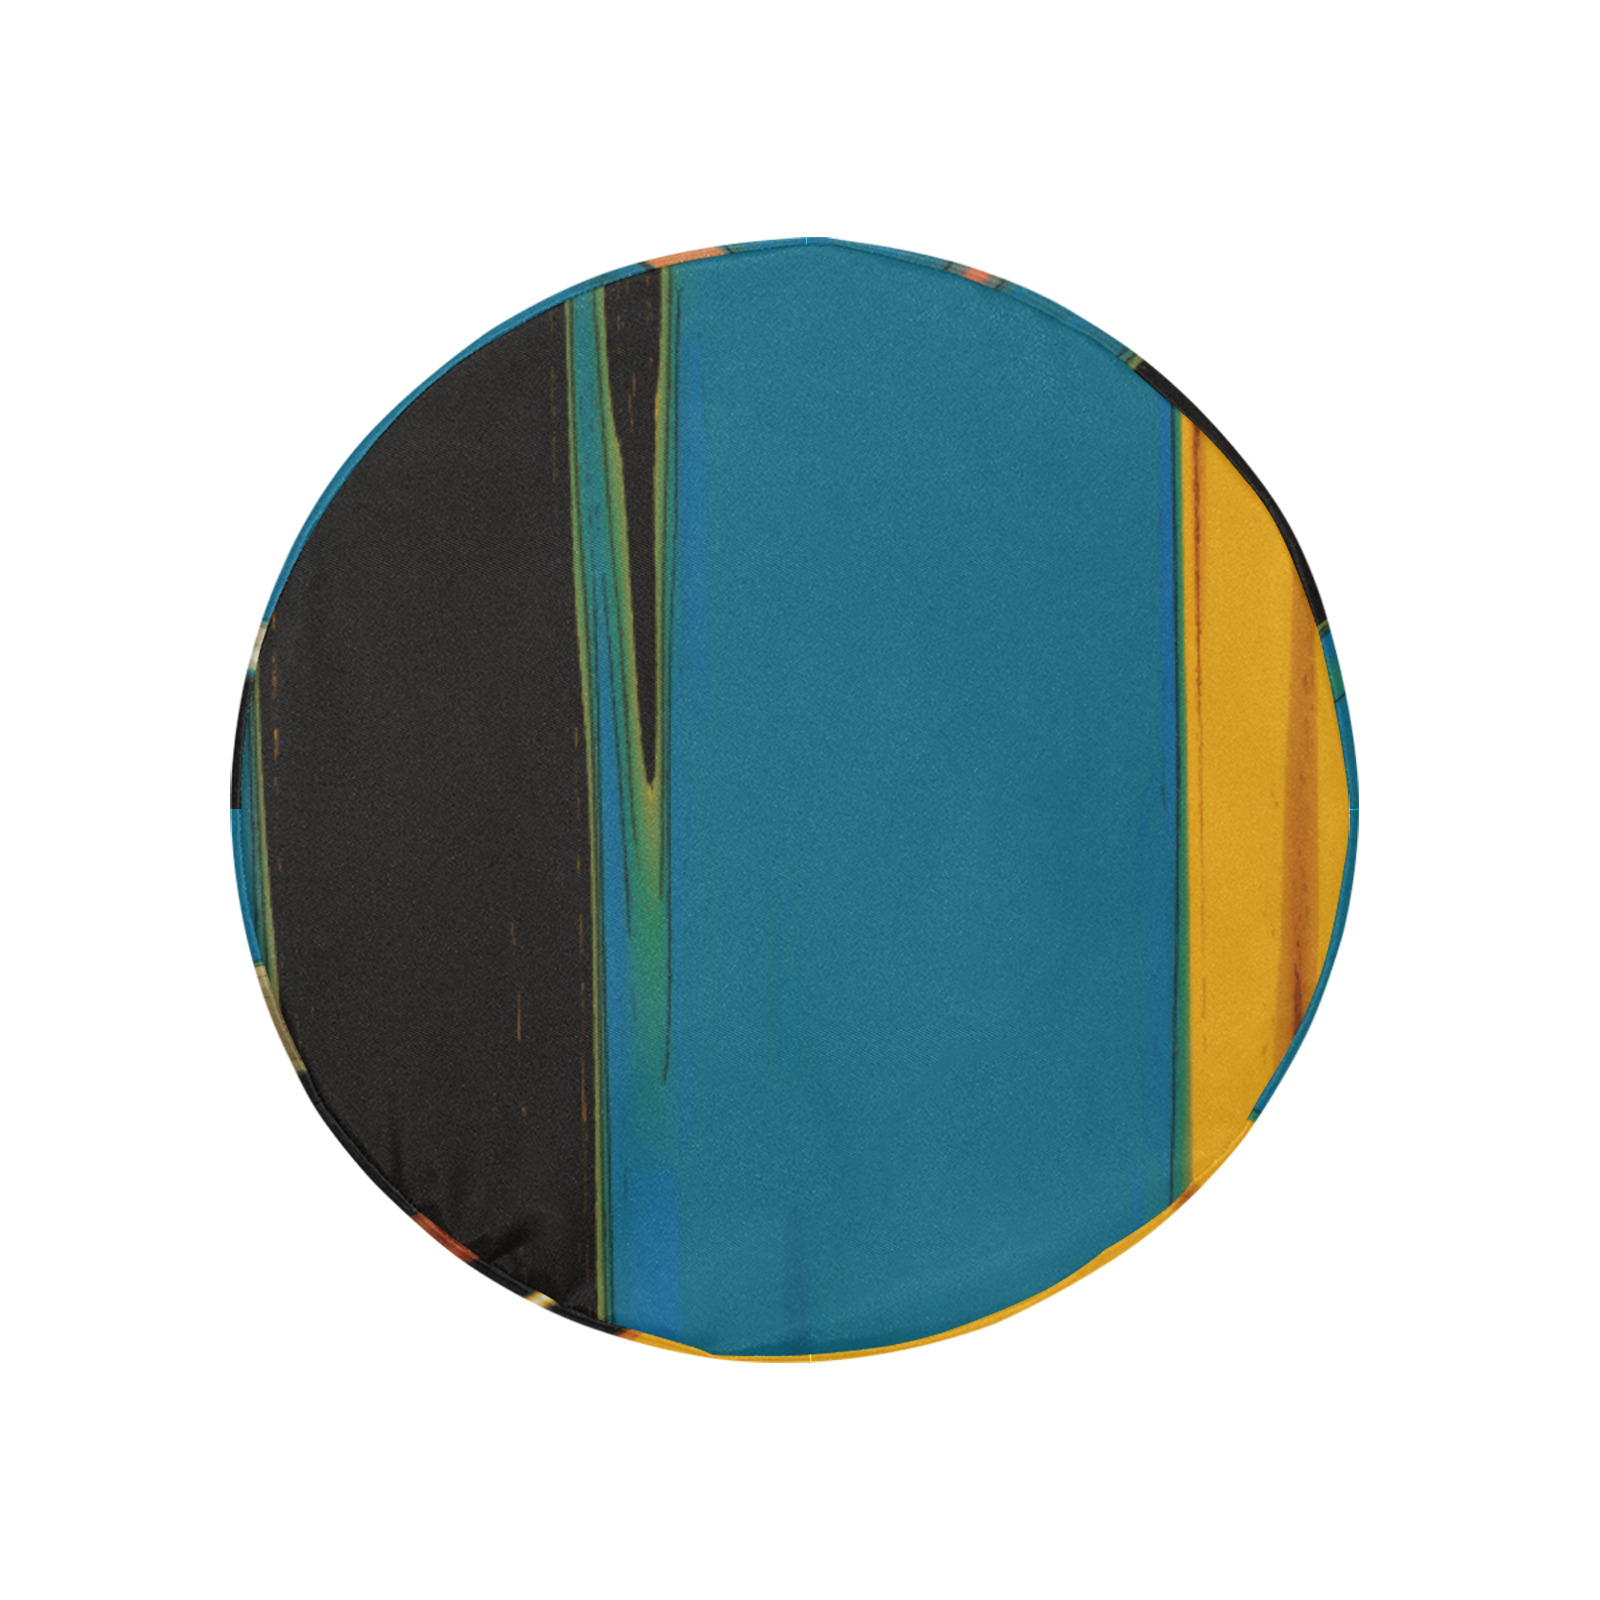 Black Turquoise And Orange Go! Abstract Art 32 Inch Spare Tire Cover